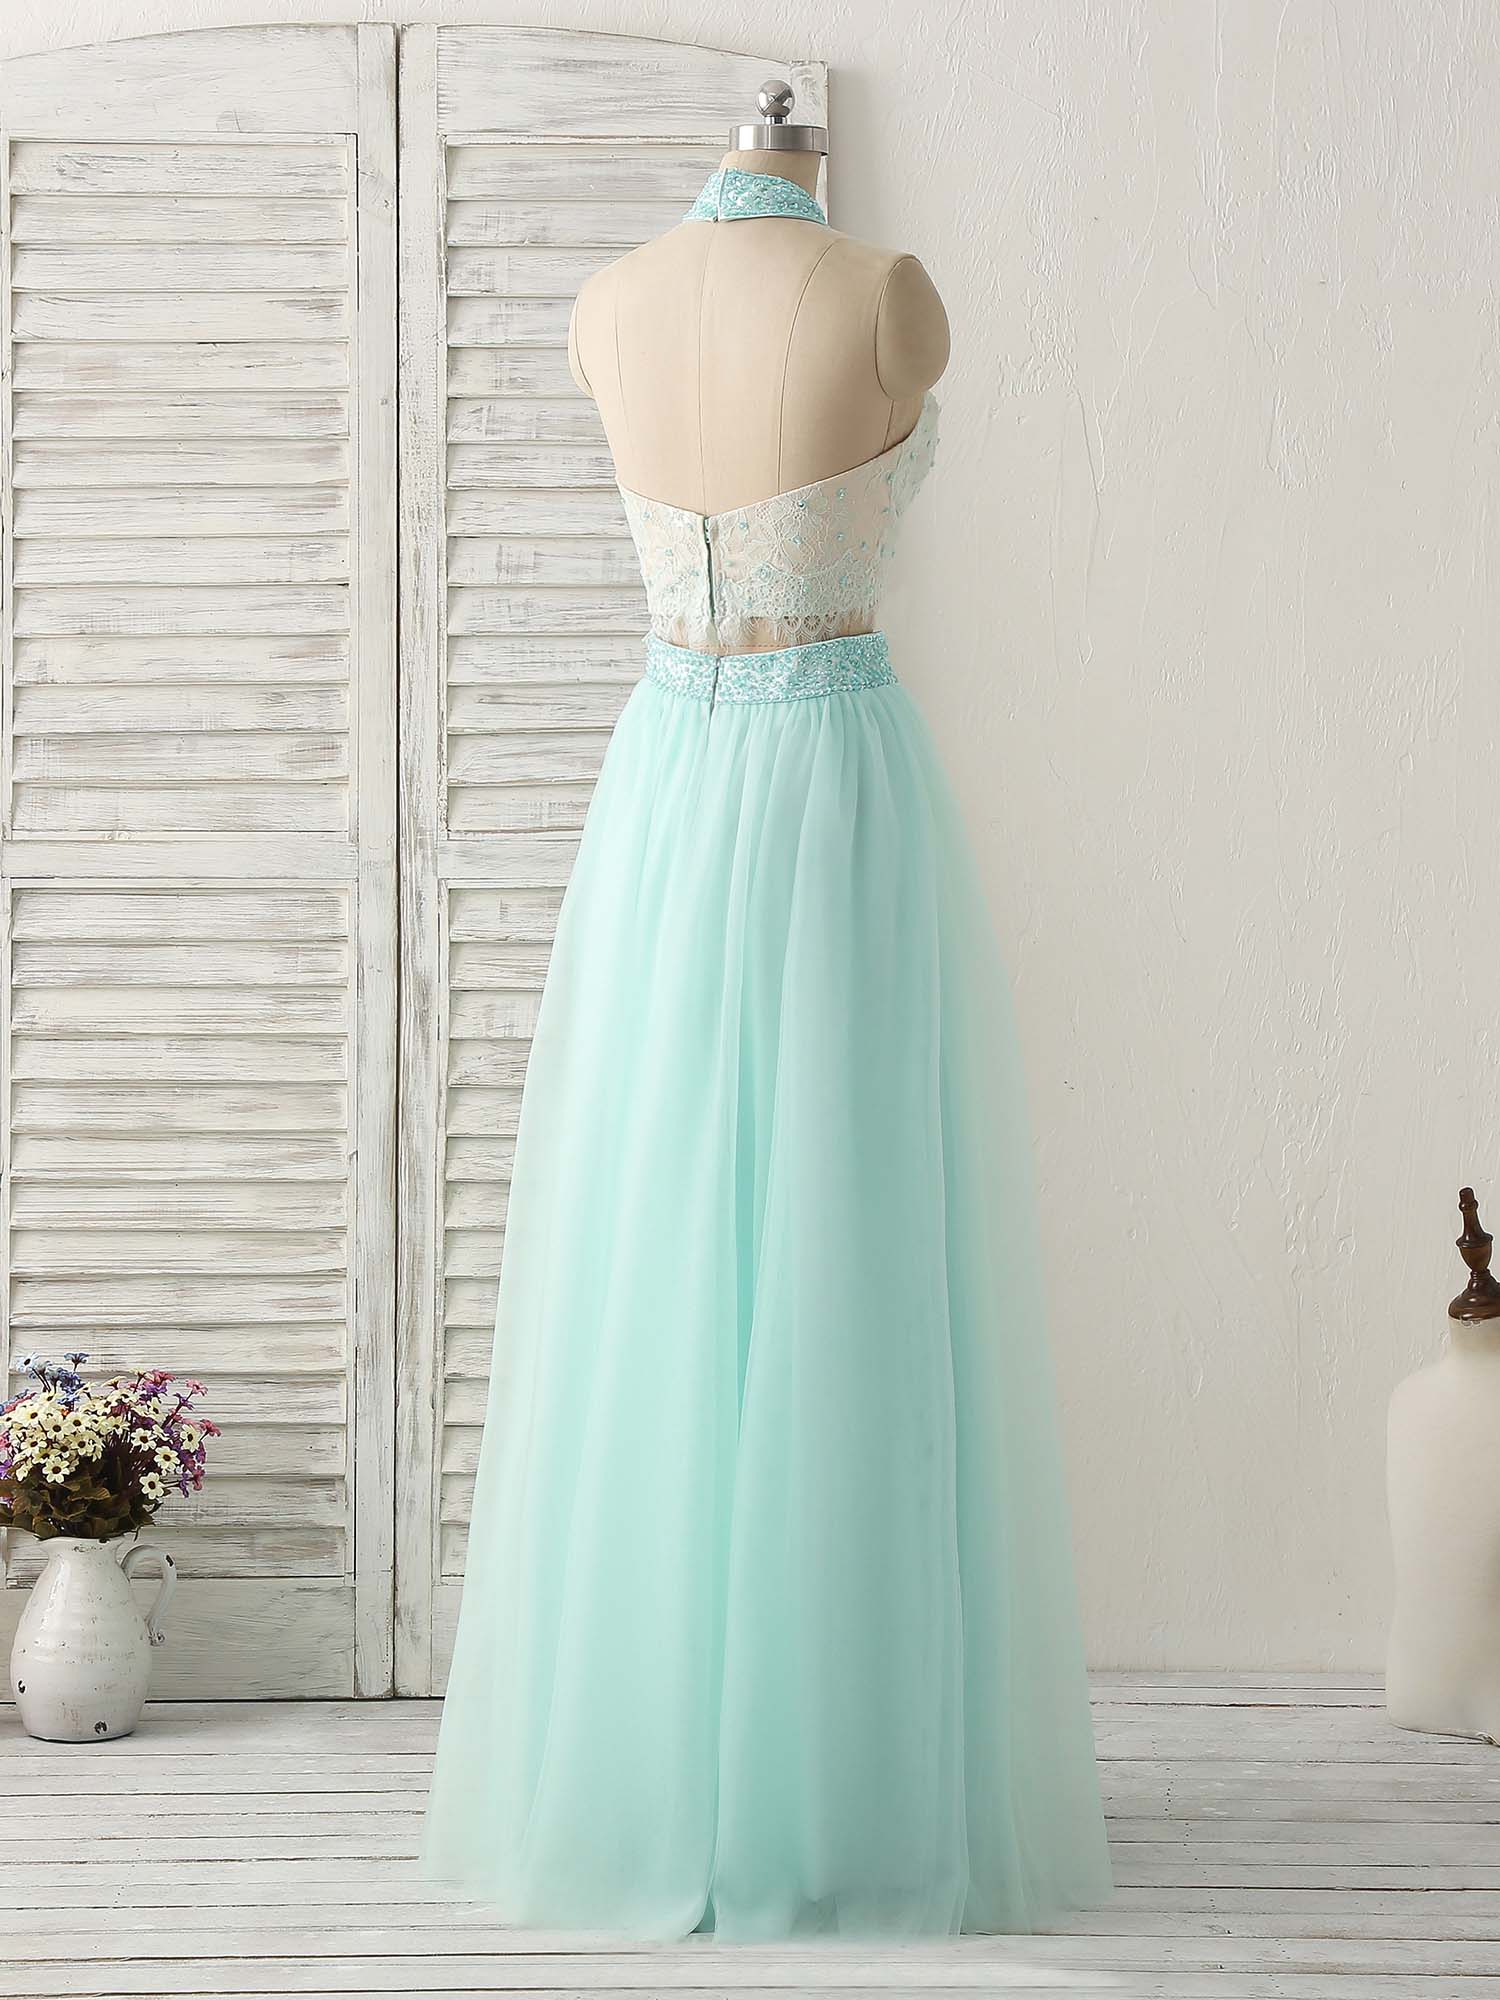 Prom Dress Outfit, Green Tulle Two Pieces Long Prom Dress Lace Beads Formal Dress